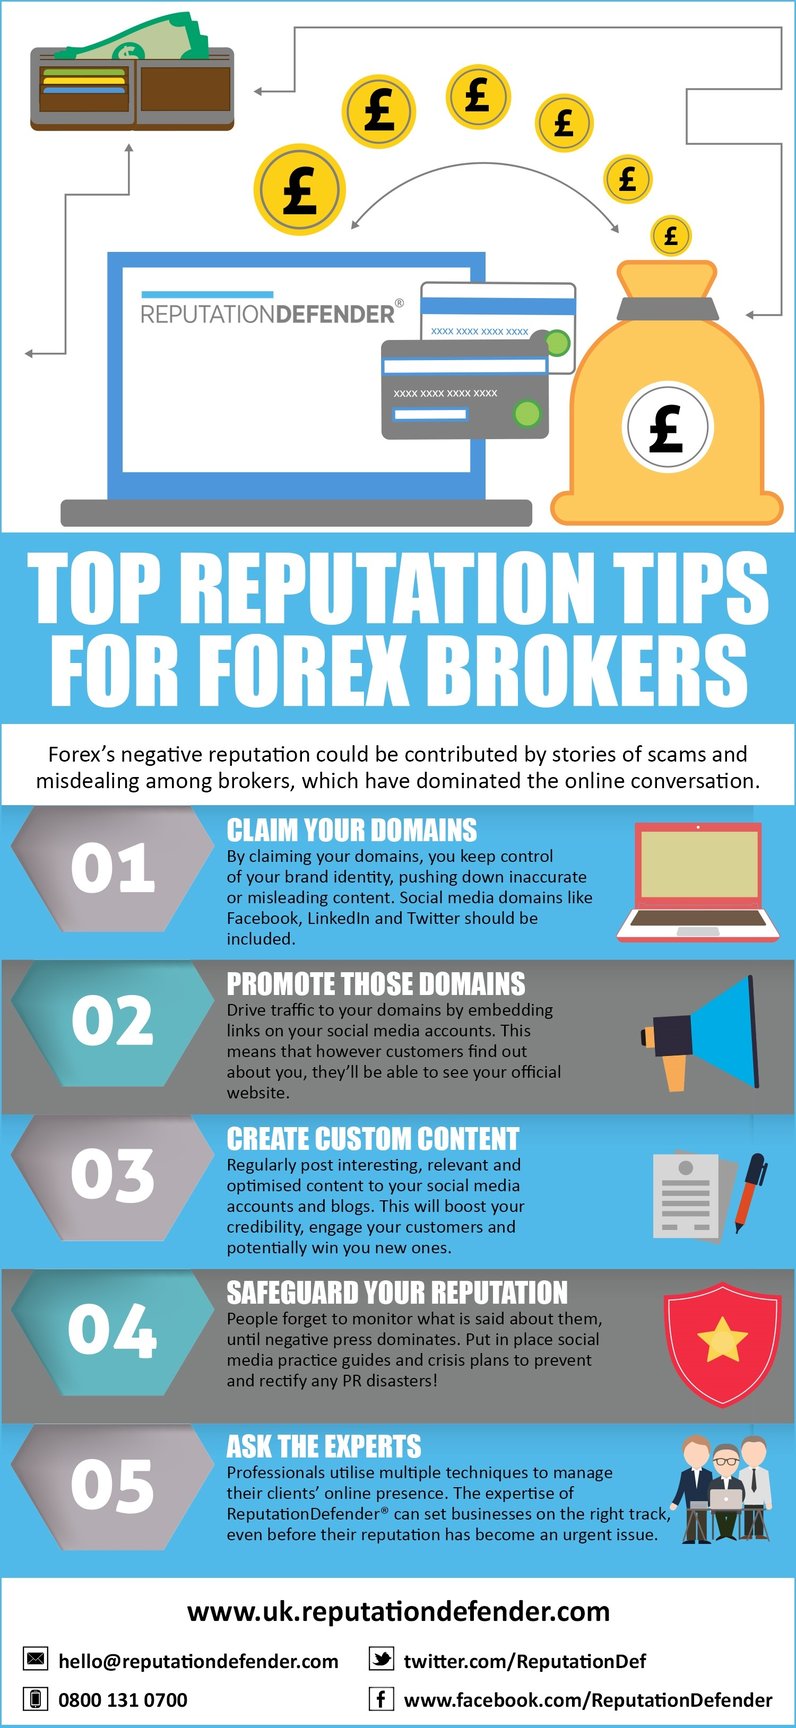 Top Reputation Tips for Forex Brokers (2).jpg